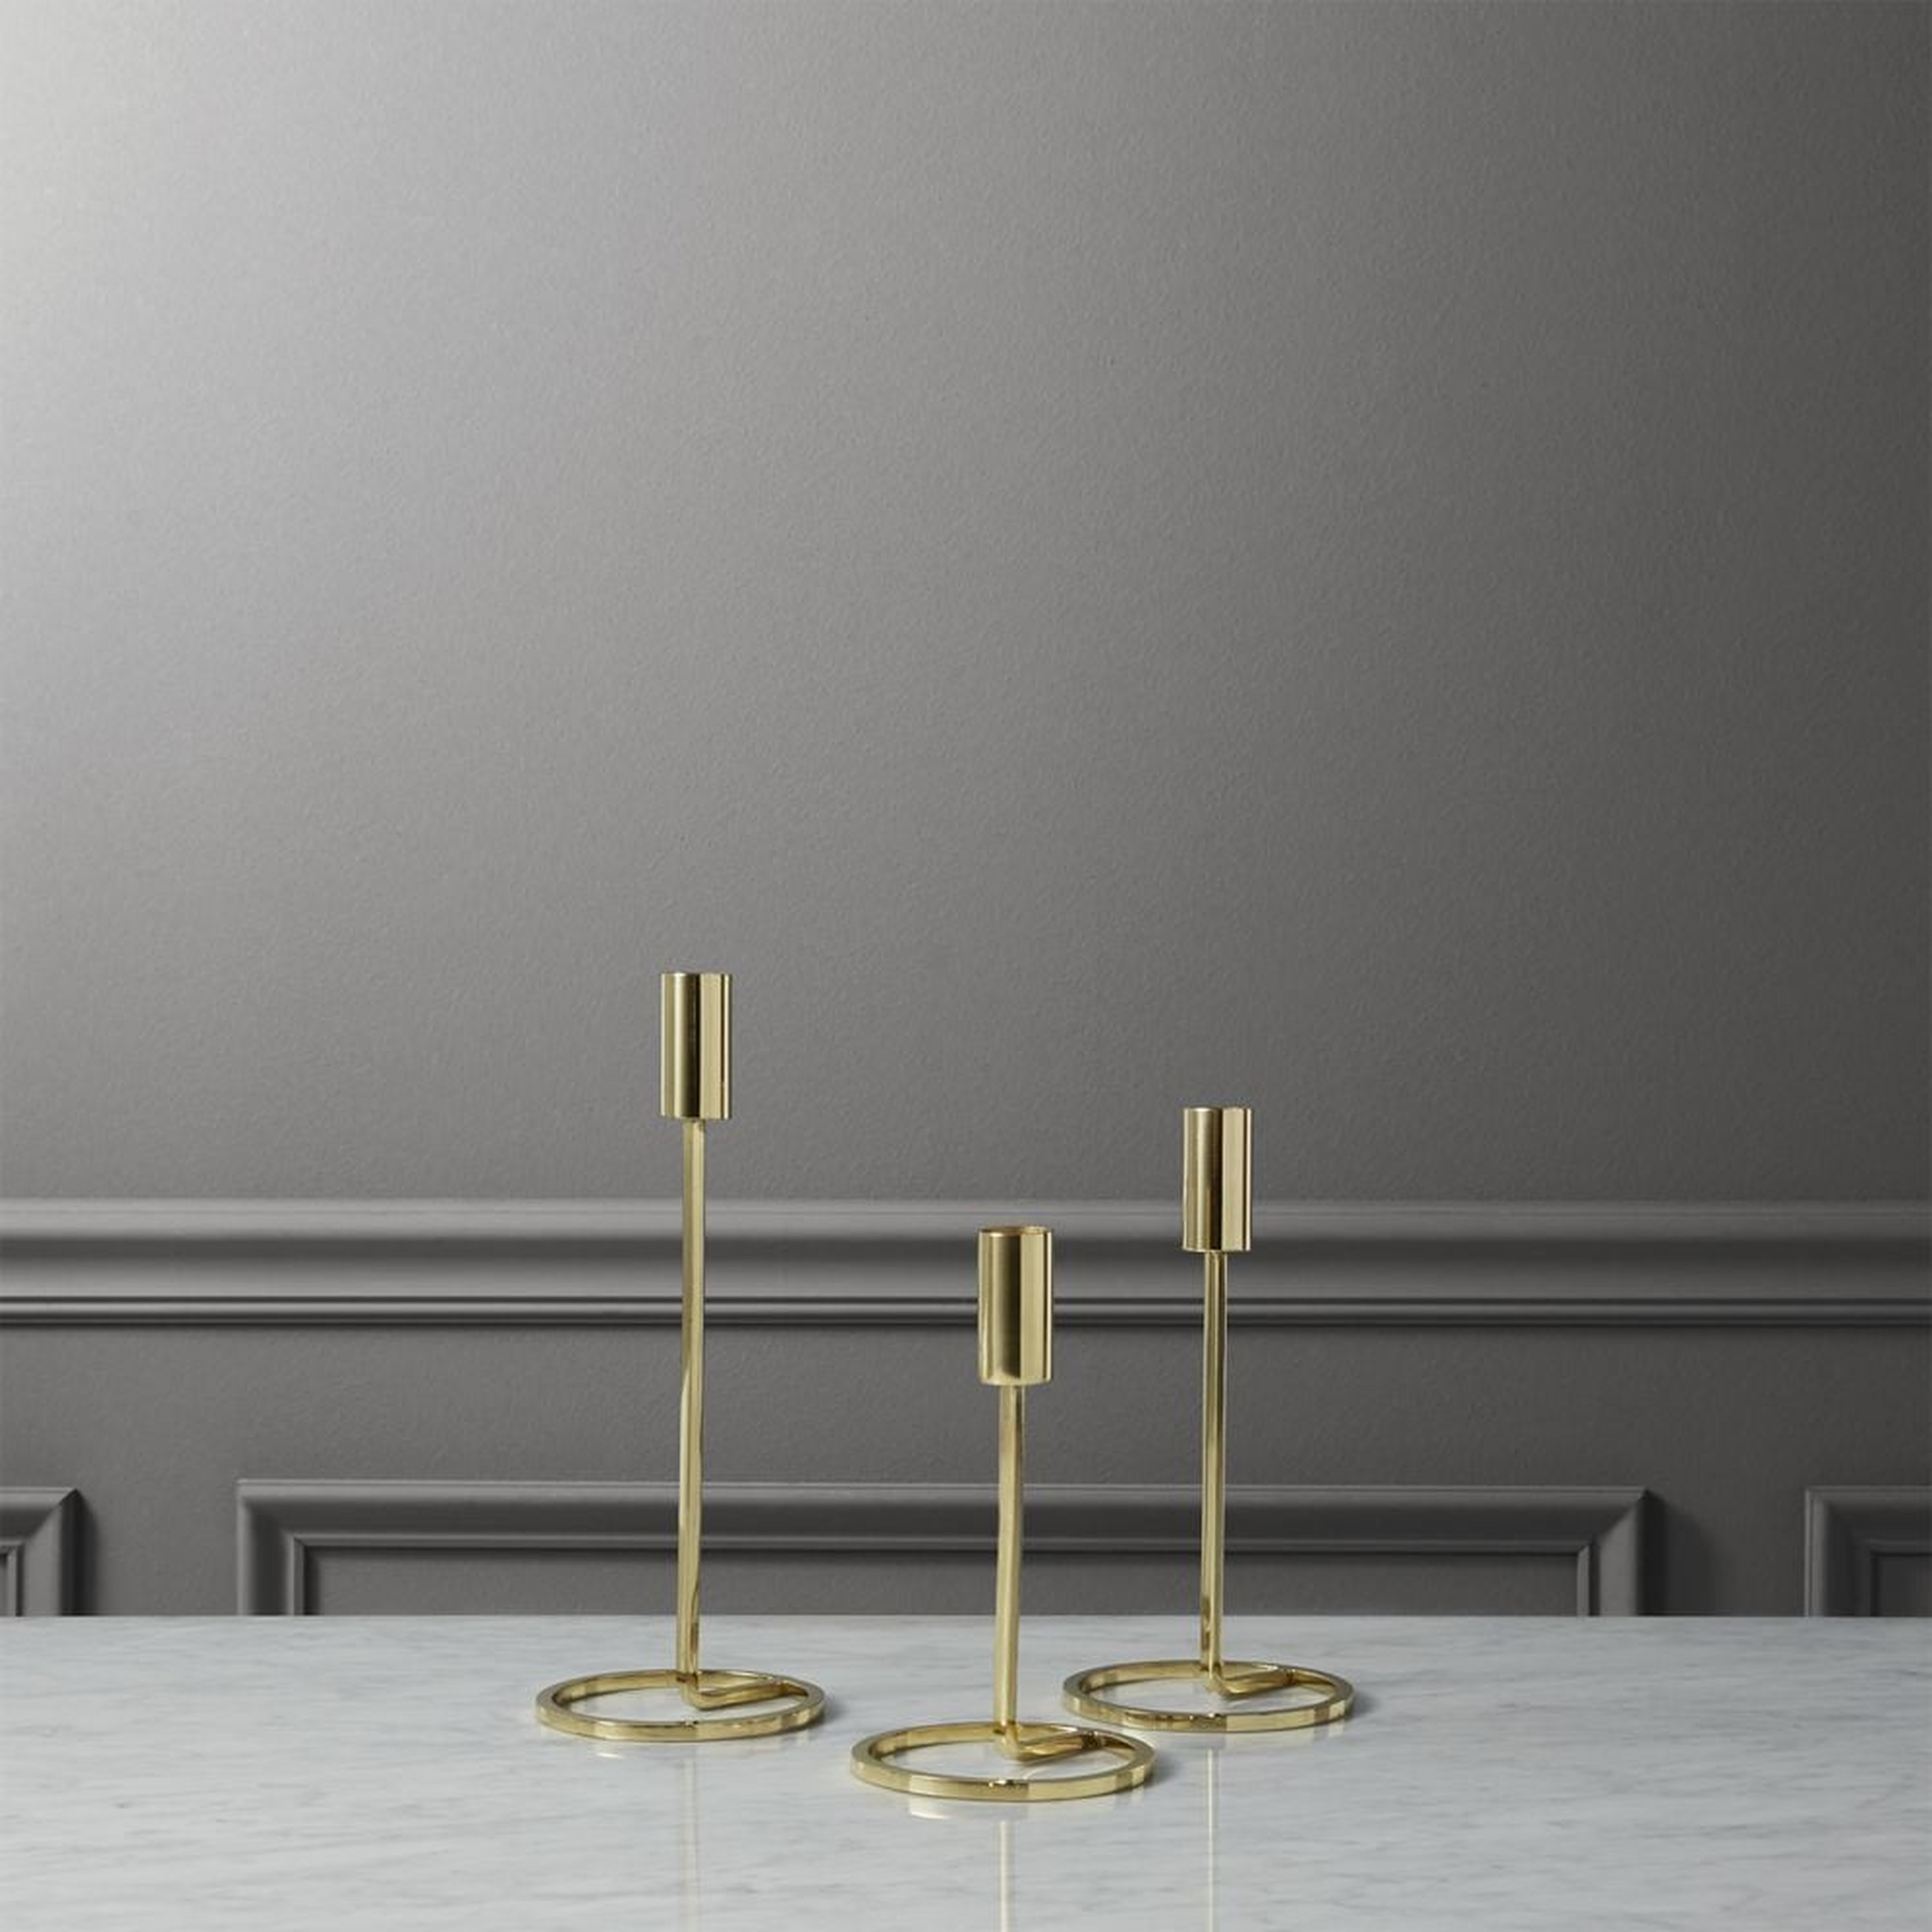 3-piece roundabout taper candle holder set - CB2